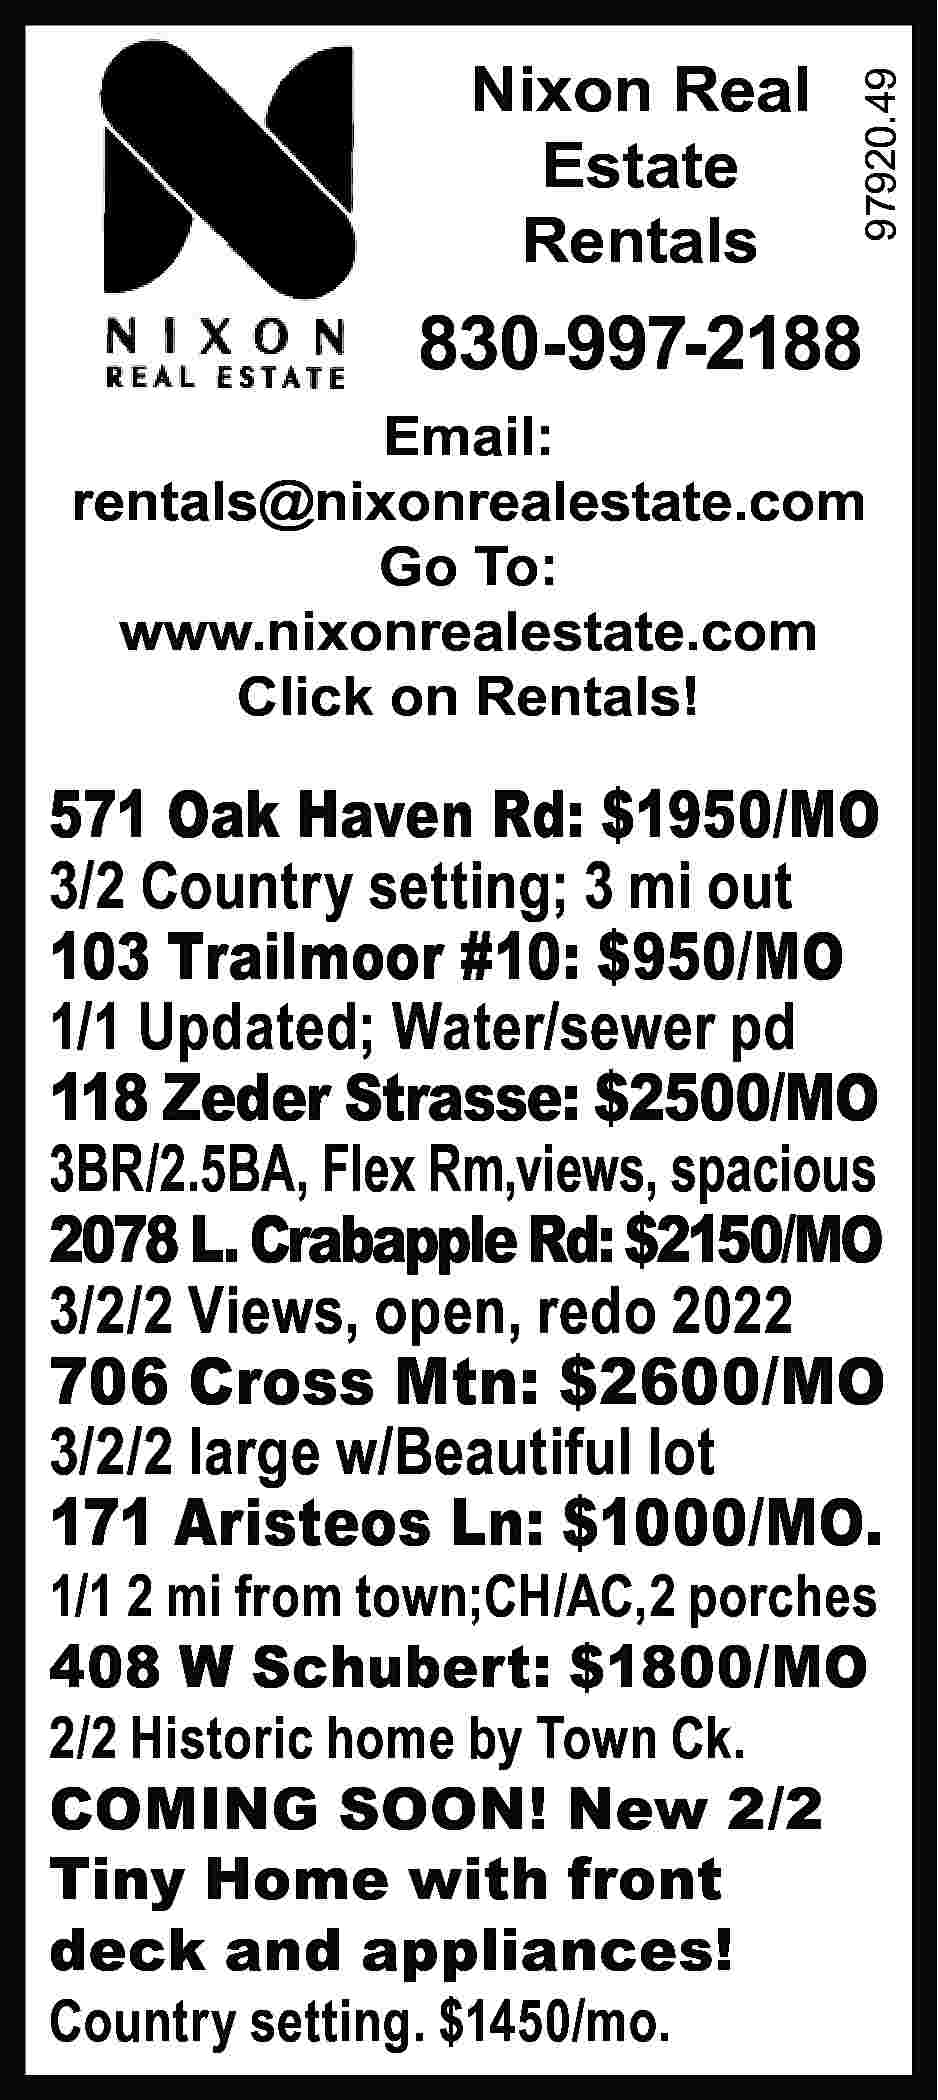 Nixon Real Estate Rentals 97920.49  Nixon Real Estate Rentals 97920.49 	 830-997-2188 Email: rentals@nixonrealestate.com Go To: www.nixonrealestate.com Click on Rentals! 571 Oak Haven Rd: $1950/MO 3/2 Country setting; 3 mi out 103 Trailmoor #10: $950/MO 1/1 Updated; Water/sewer pd 118 Zeder Strasse: $2500/MO 3BR/2.5BA, Flex Rm,views, spacious 2078 L. Crabapple Rd: $2150/MO 3/2/2 Views, open, redo 2022 706 Cross Mtn: $2600/MO 3/2/2 large w/Beautiful lot 171 Aristeos Ln: $1000/MO. 1/1 2 mi from town;CH/AC,2 porches 408 W Schubert: $1800/MO 2/2 Historic home by Town Ck. COMING SOON! New 2/2 Tiny Home with front deck and appliances! Country setting. $1450/mo.